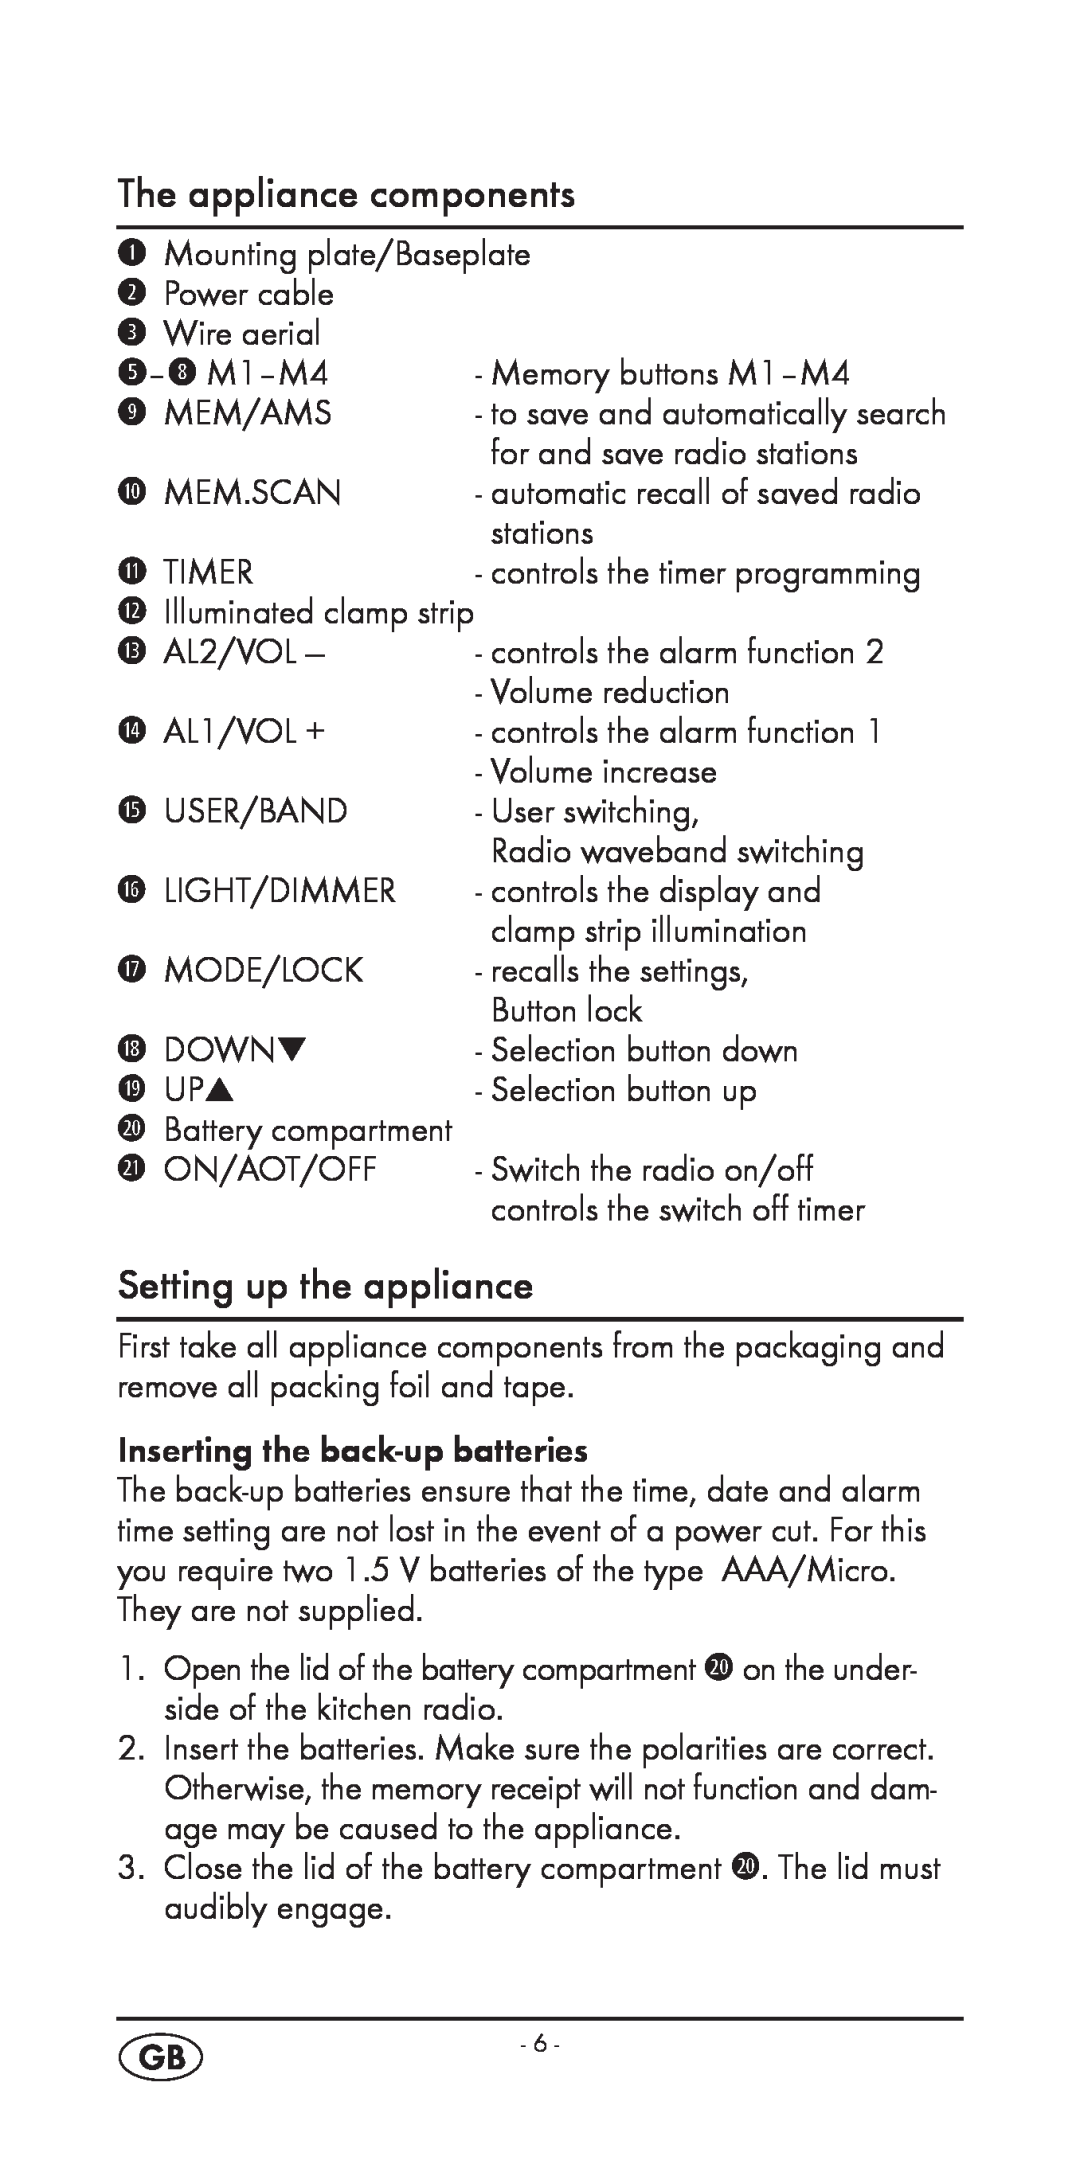 Silvercrest KH 2299 manual The appliance components, Setting up the appliance, 1 UP 